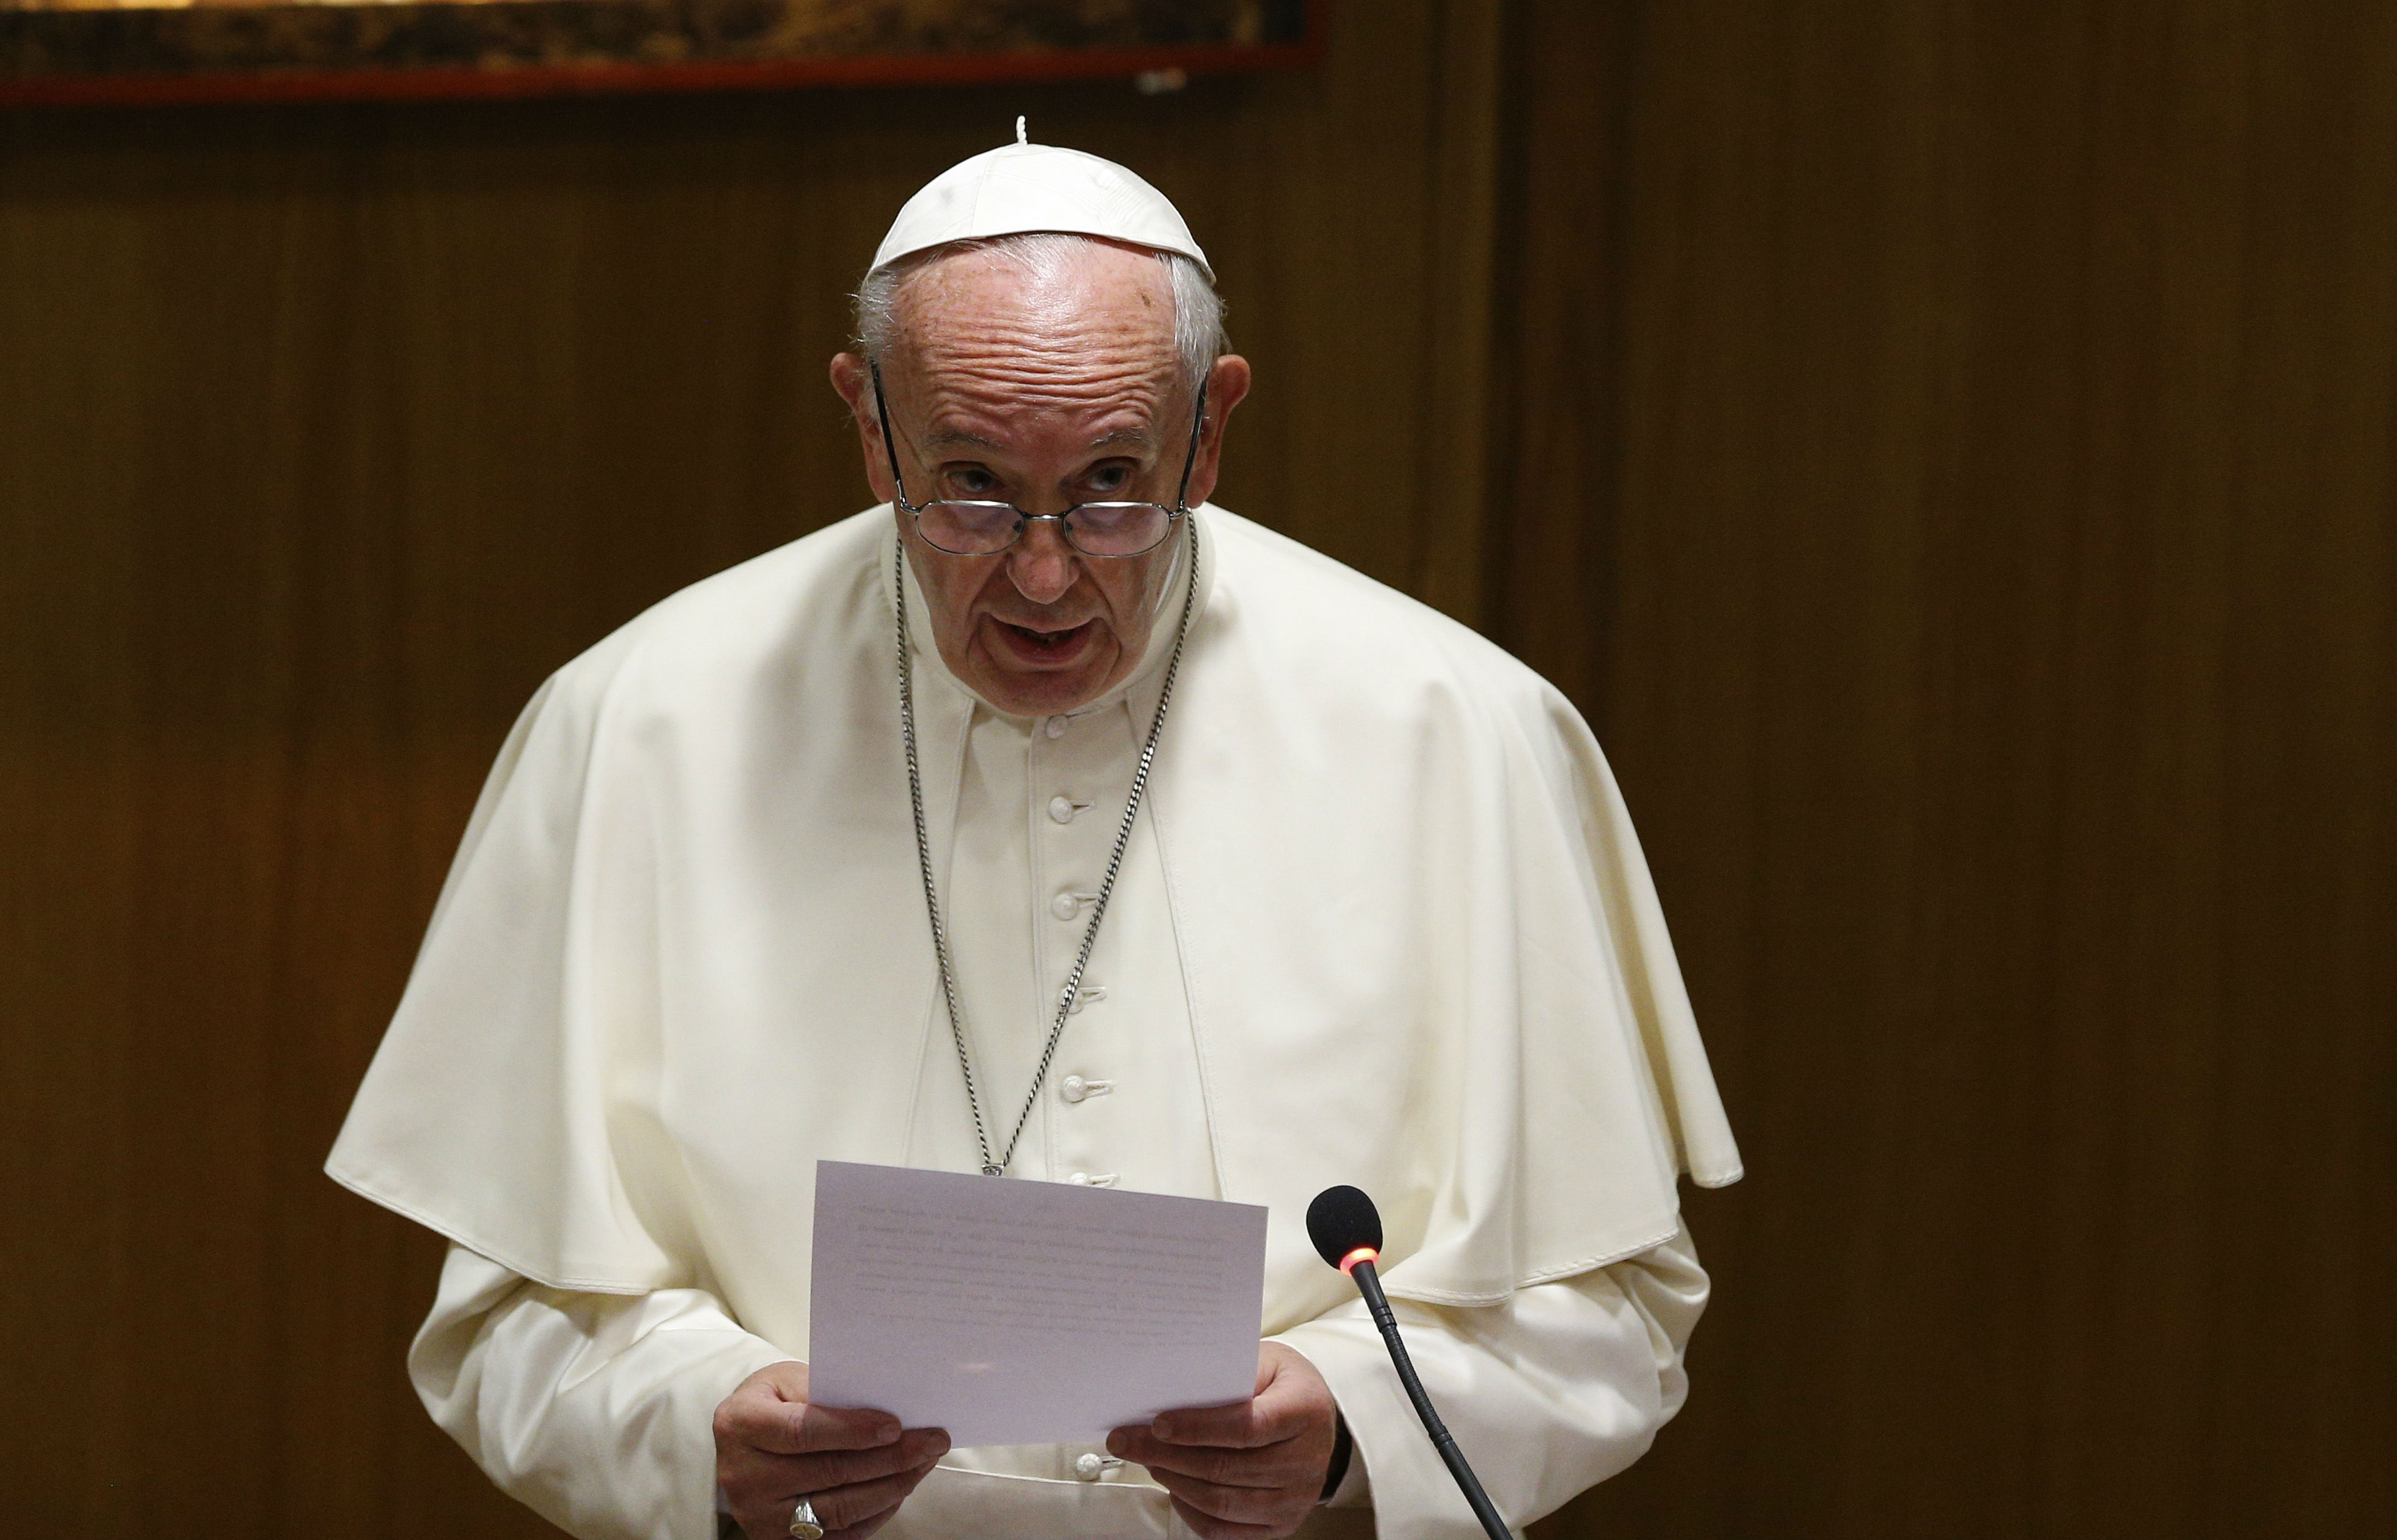 Change Catholic teaching to make death penalty 'inadmissible', says Pope